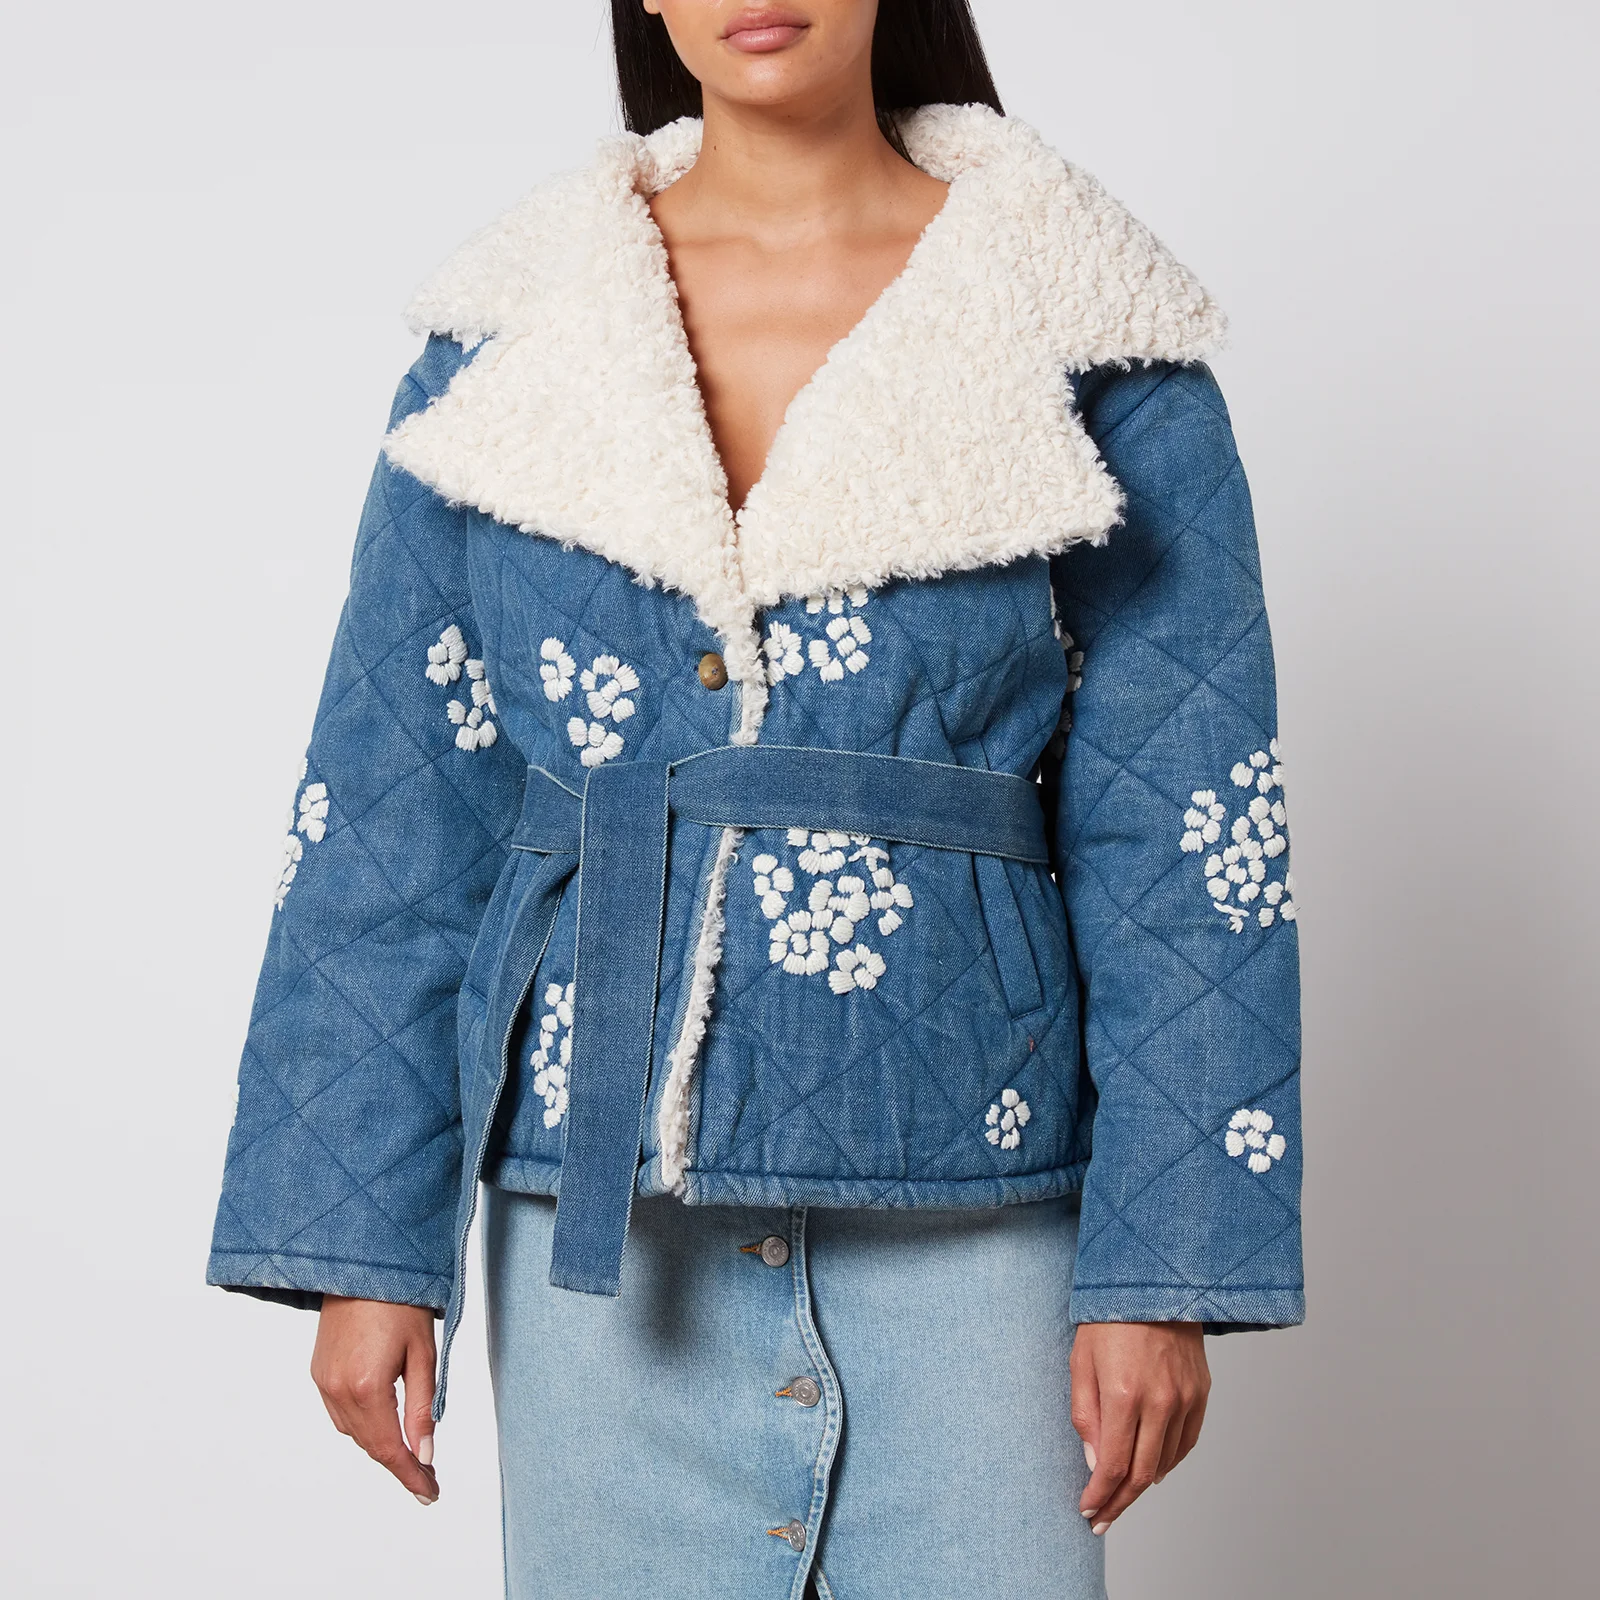 Tach Wilma Floral-Embrodiered Denim and Sherpa Jacket - S Image 1